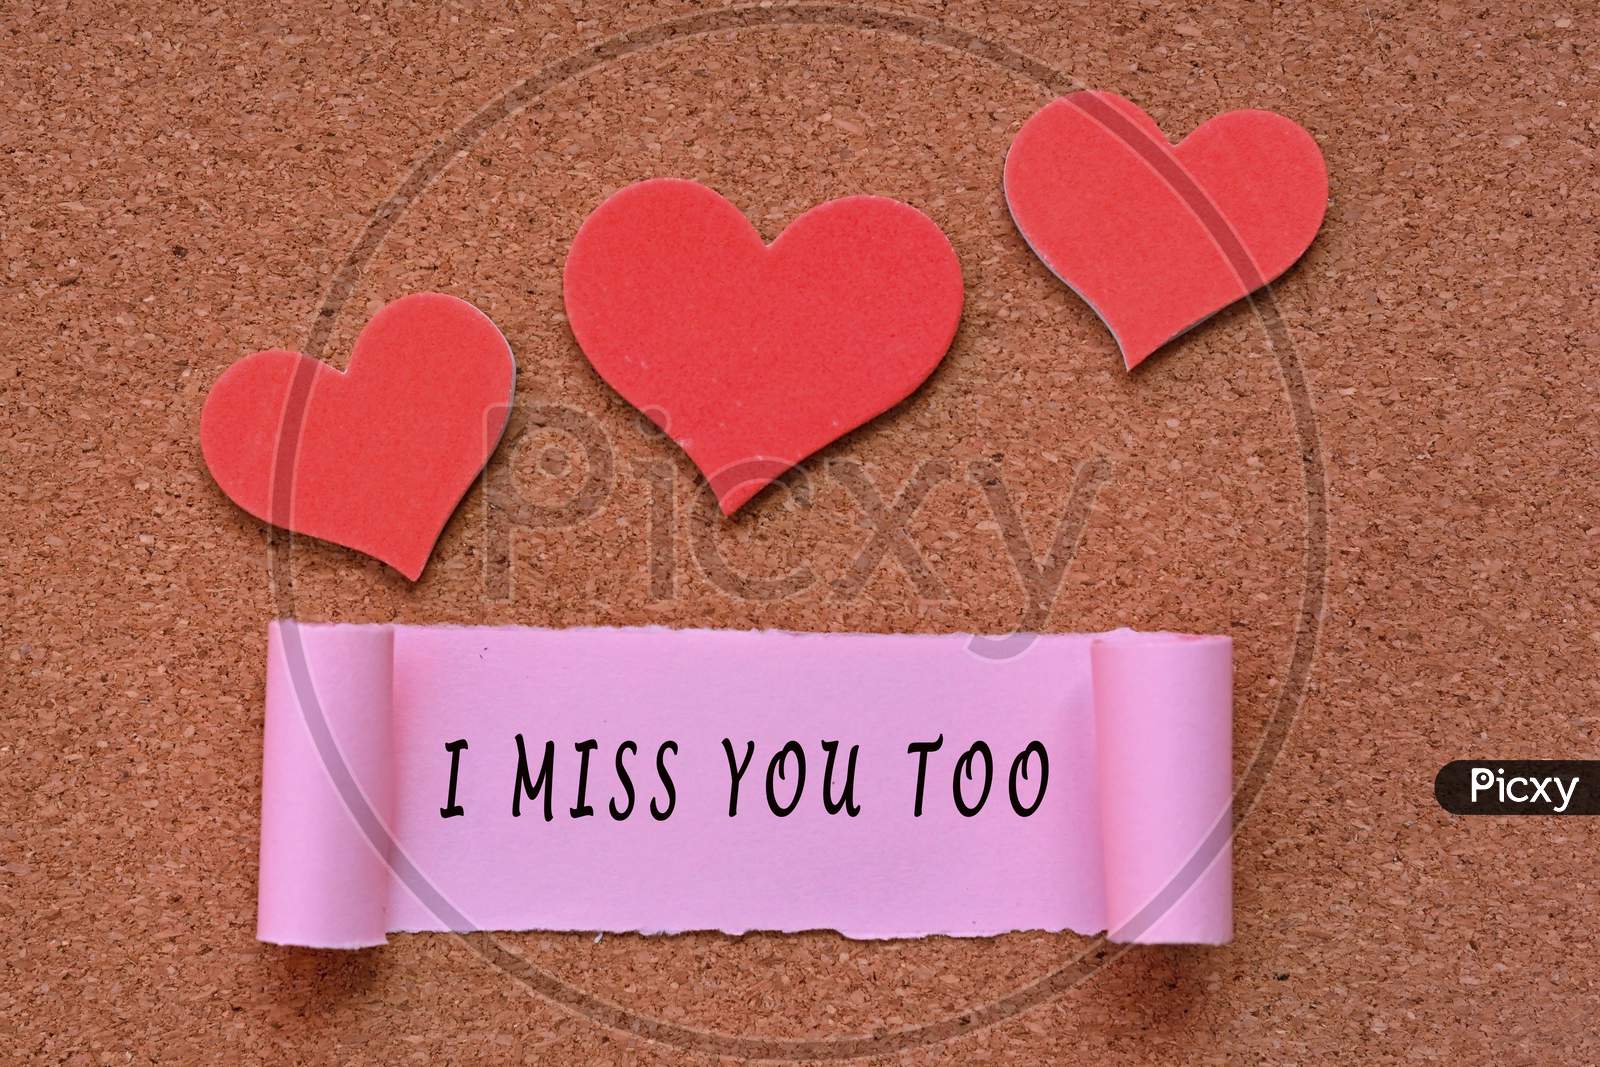 I Miss You Too Label On Torn Paper With Heart Shape On Wooden Background